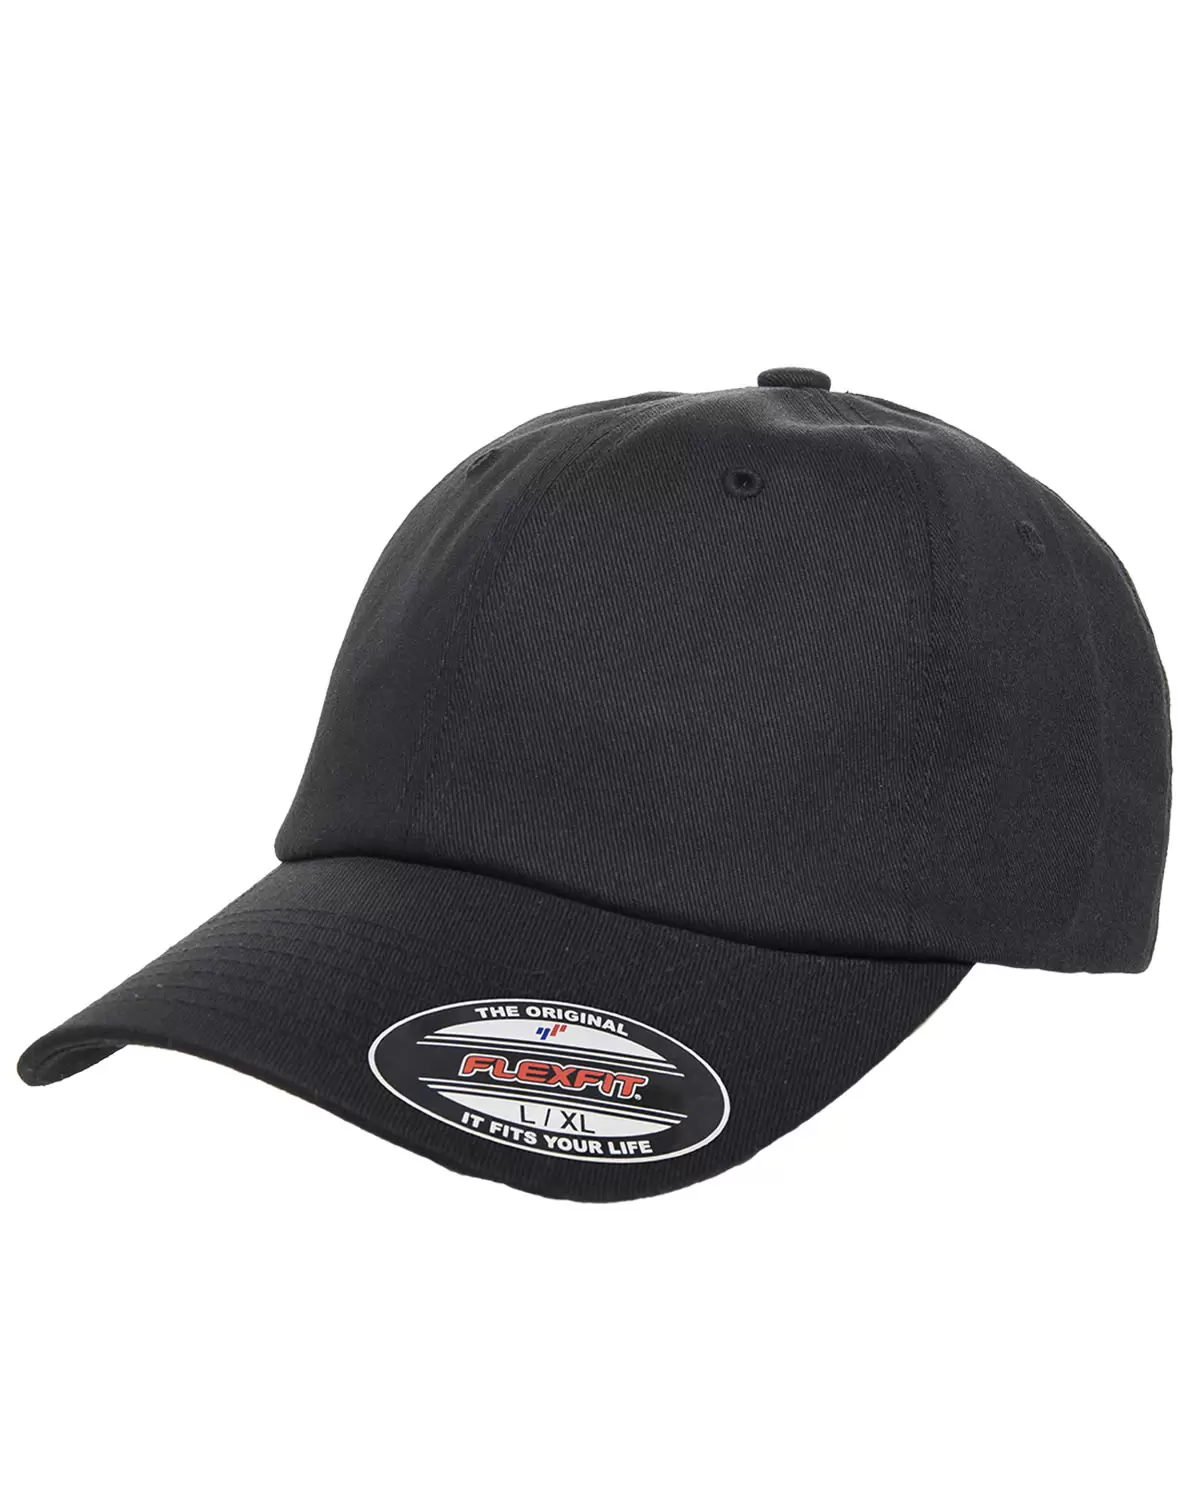 Yupoong-Flex Fit 6745 Cotton Twill Dad's Cap - From